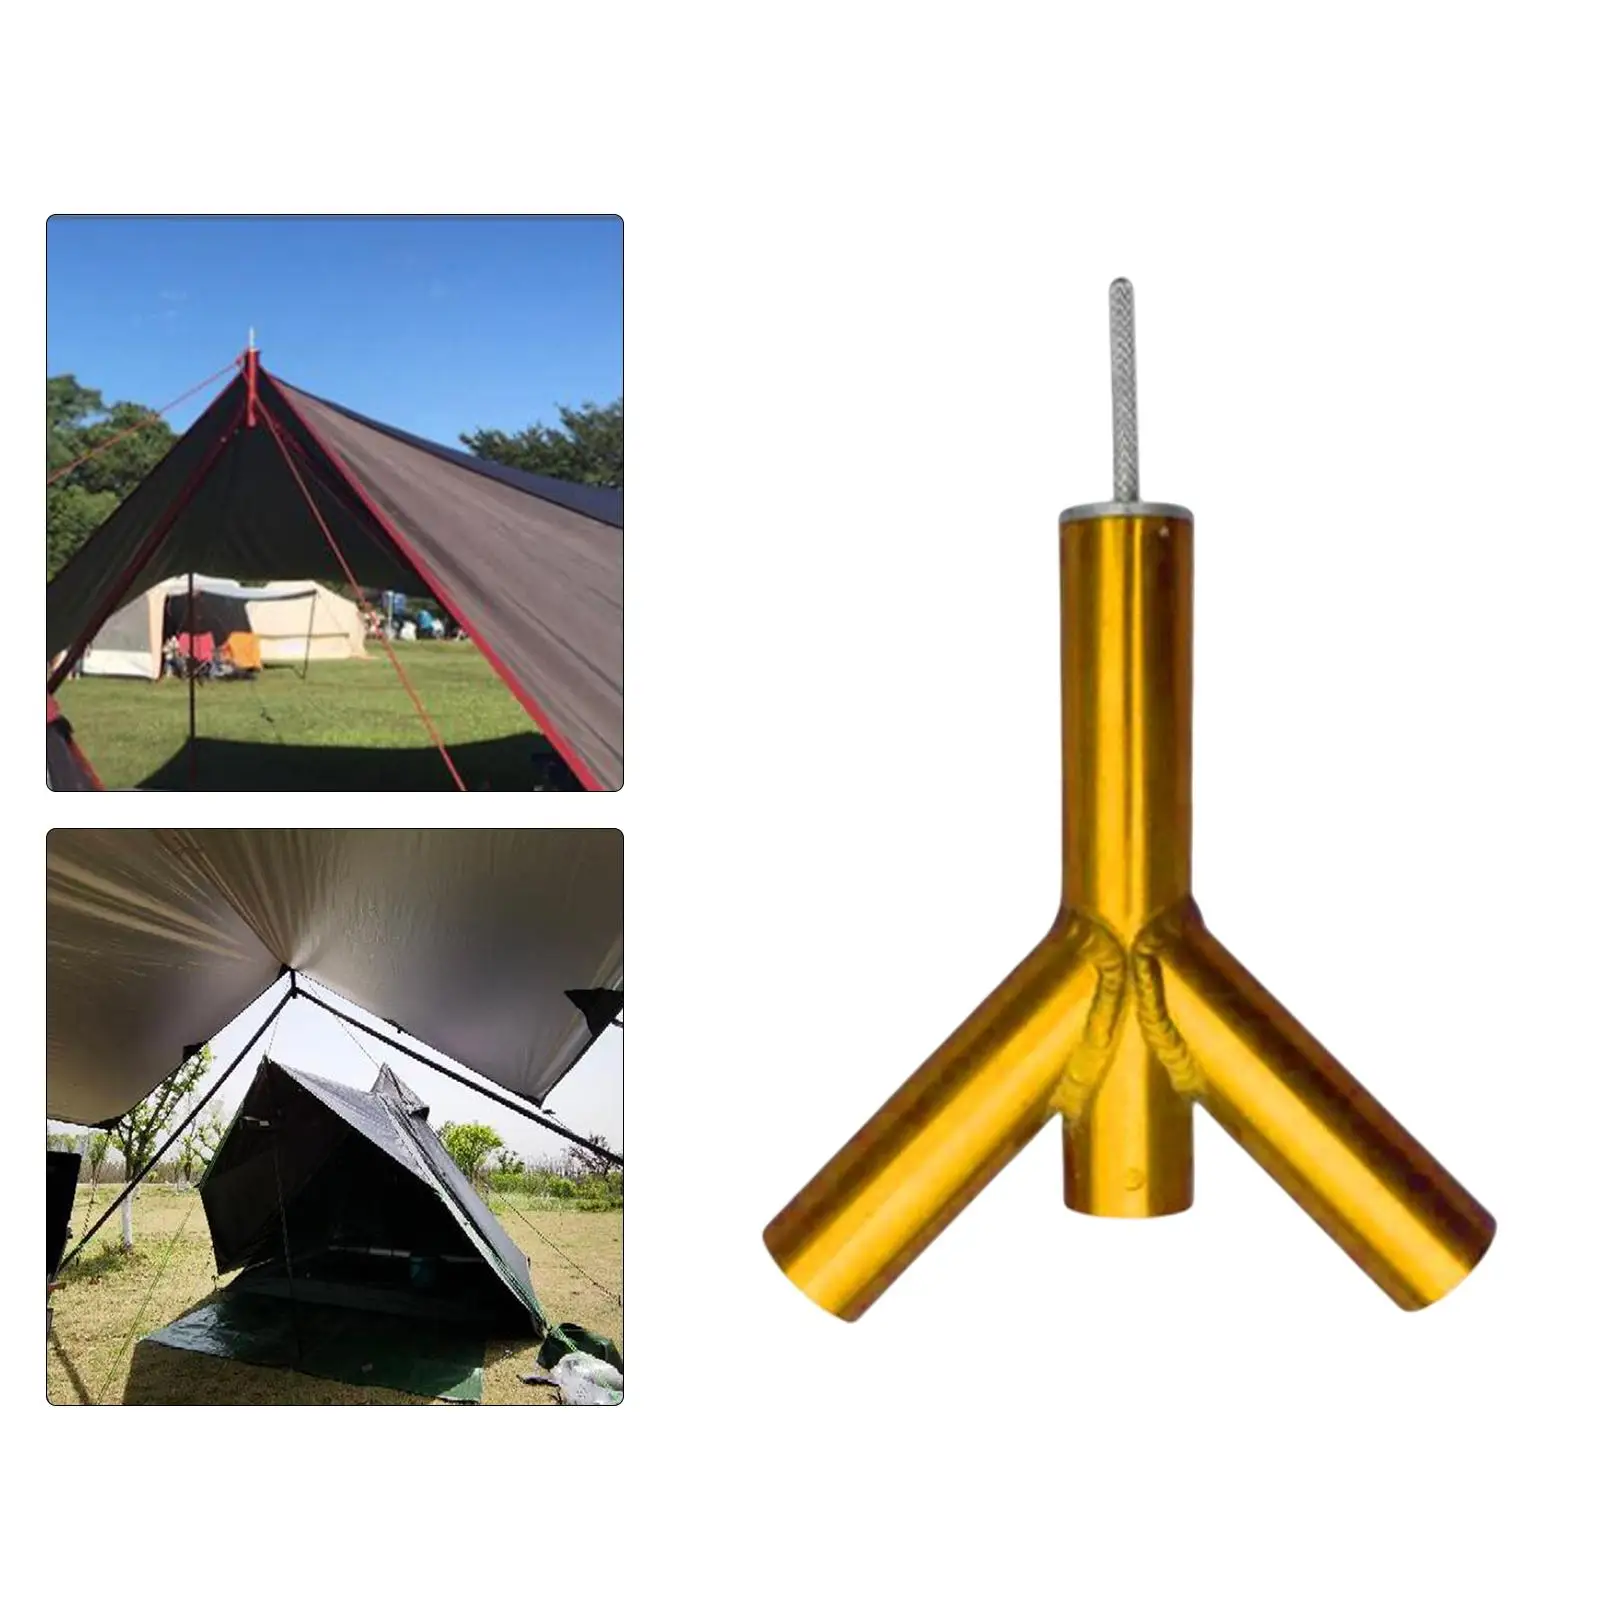 Portable Camping Tent Tarp Poles Canopy Awning Rod Shelters Stand Outdoor Stick for Sunshade Hiking Backpacking Tent Fly